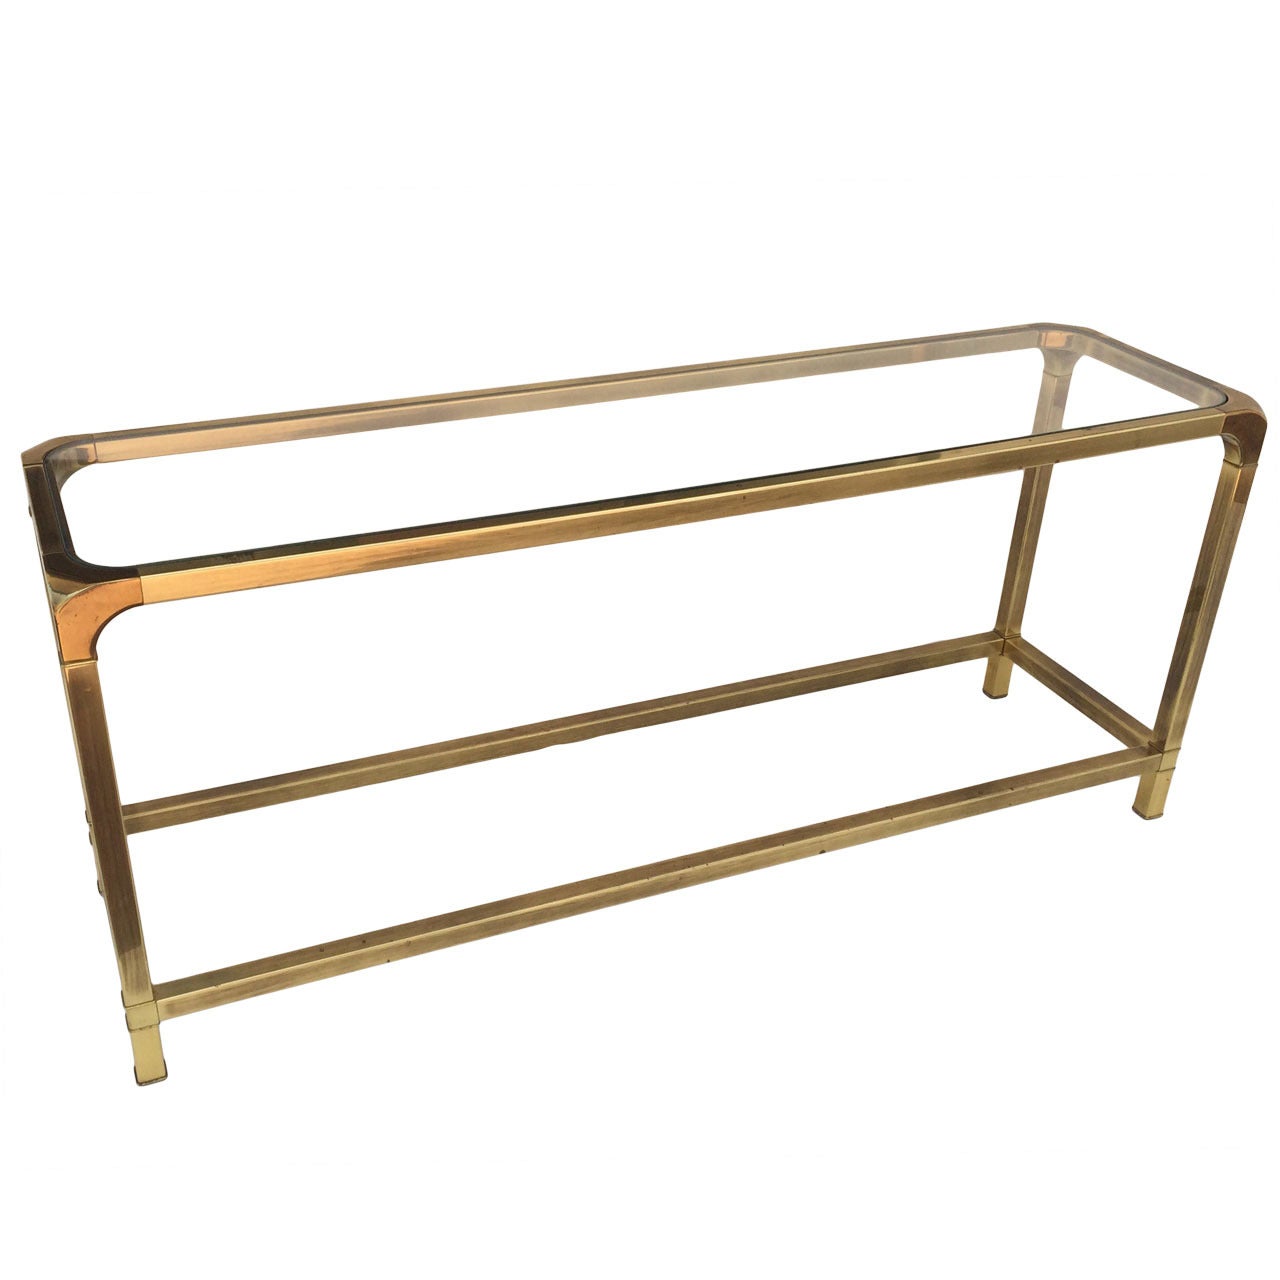 Brass and Glass Console by Mastercraft.